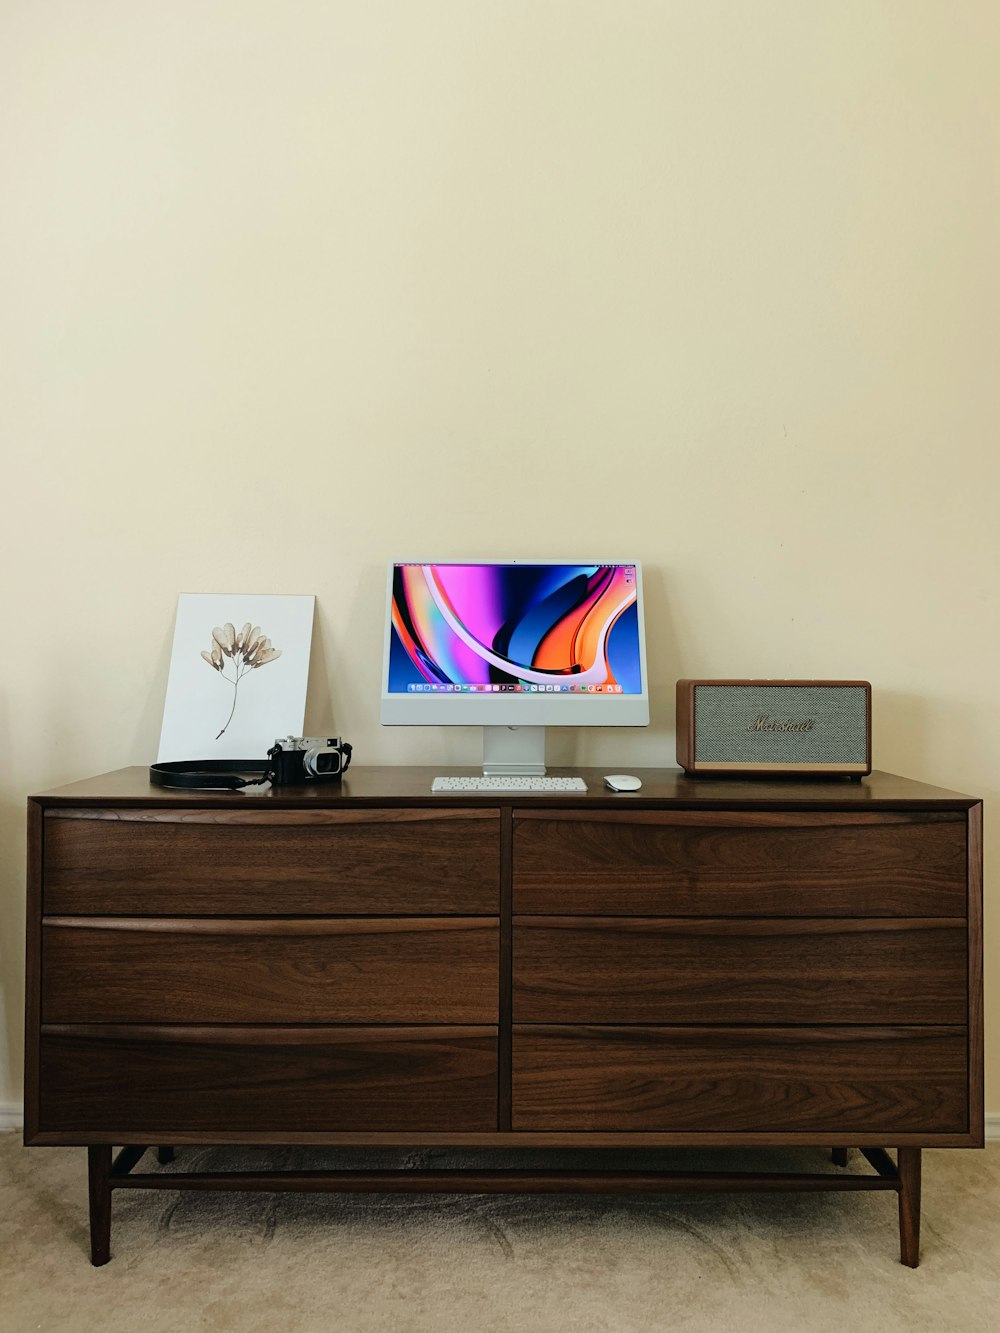 a computer monitor sitting on top of a wooden dresser